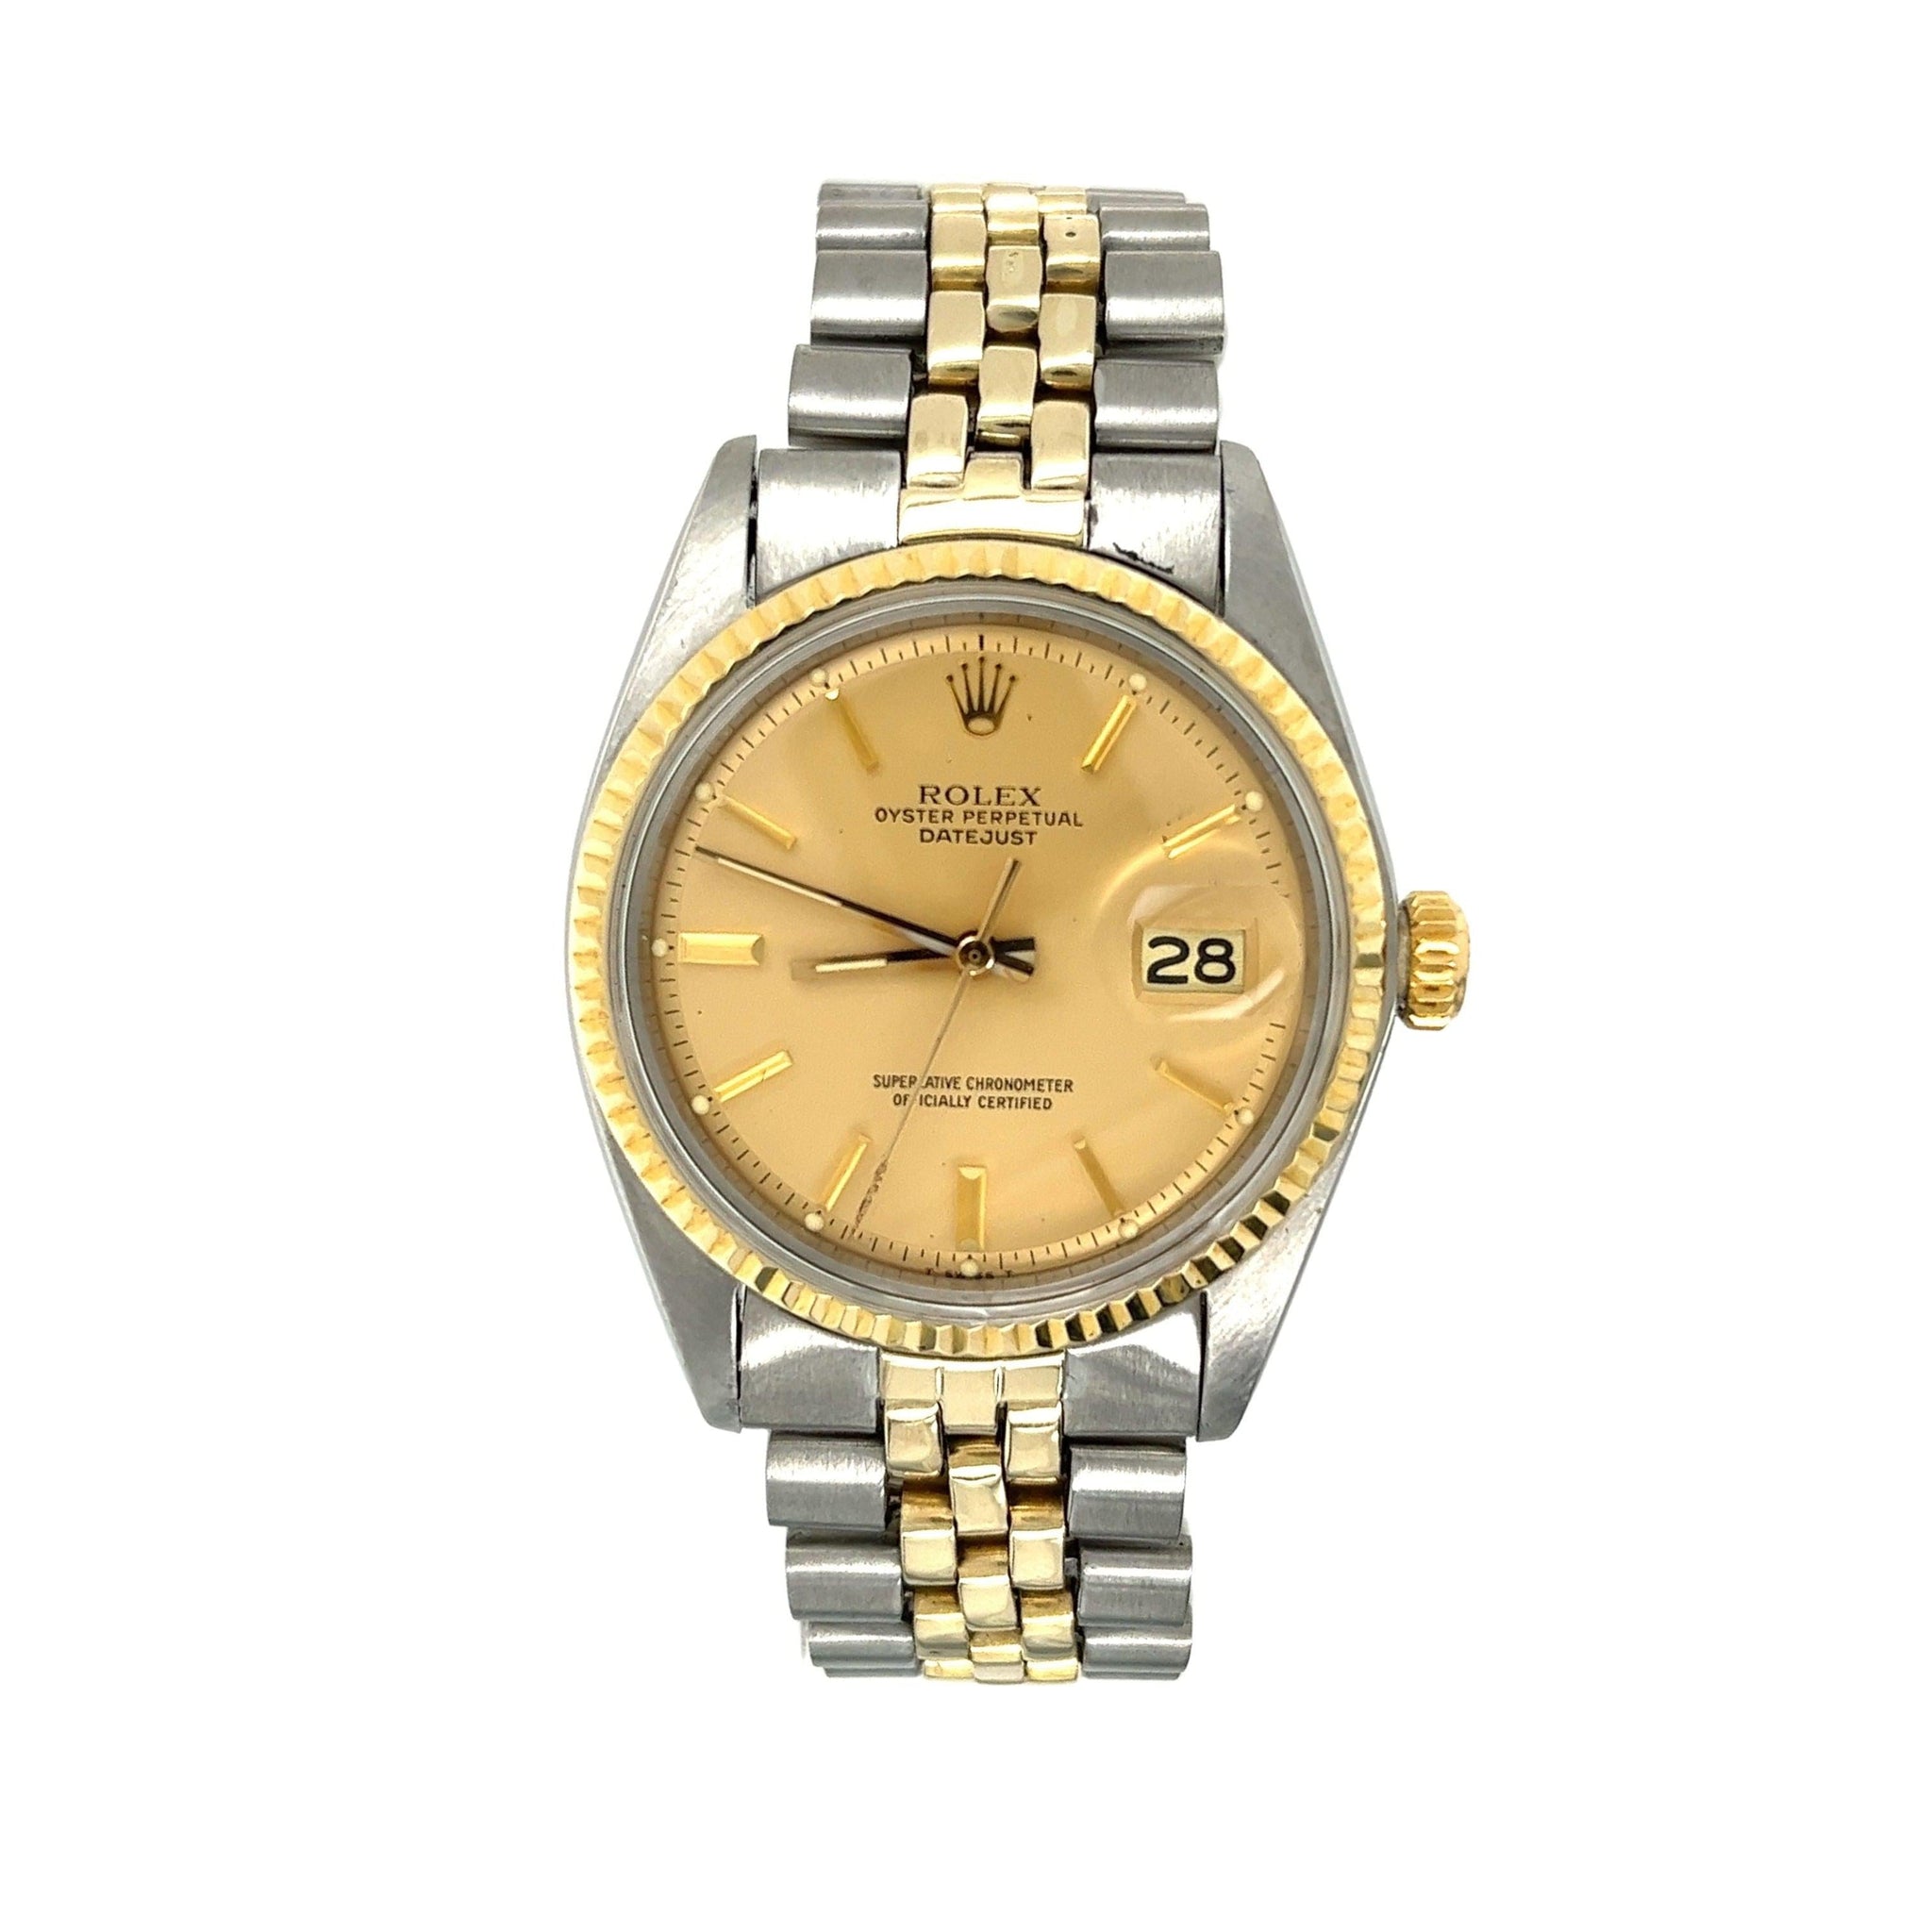 Vintage Rolex Datejust Ref. 1601 Two Tone Watch With Jubilee Bracelet-Watches-ASSAY